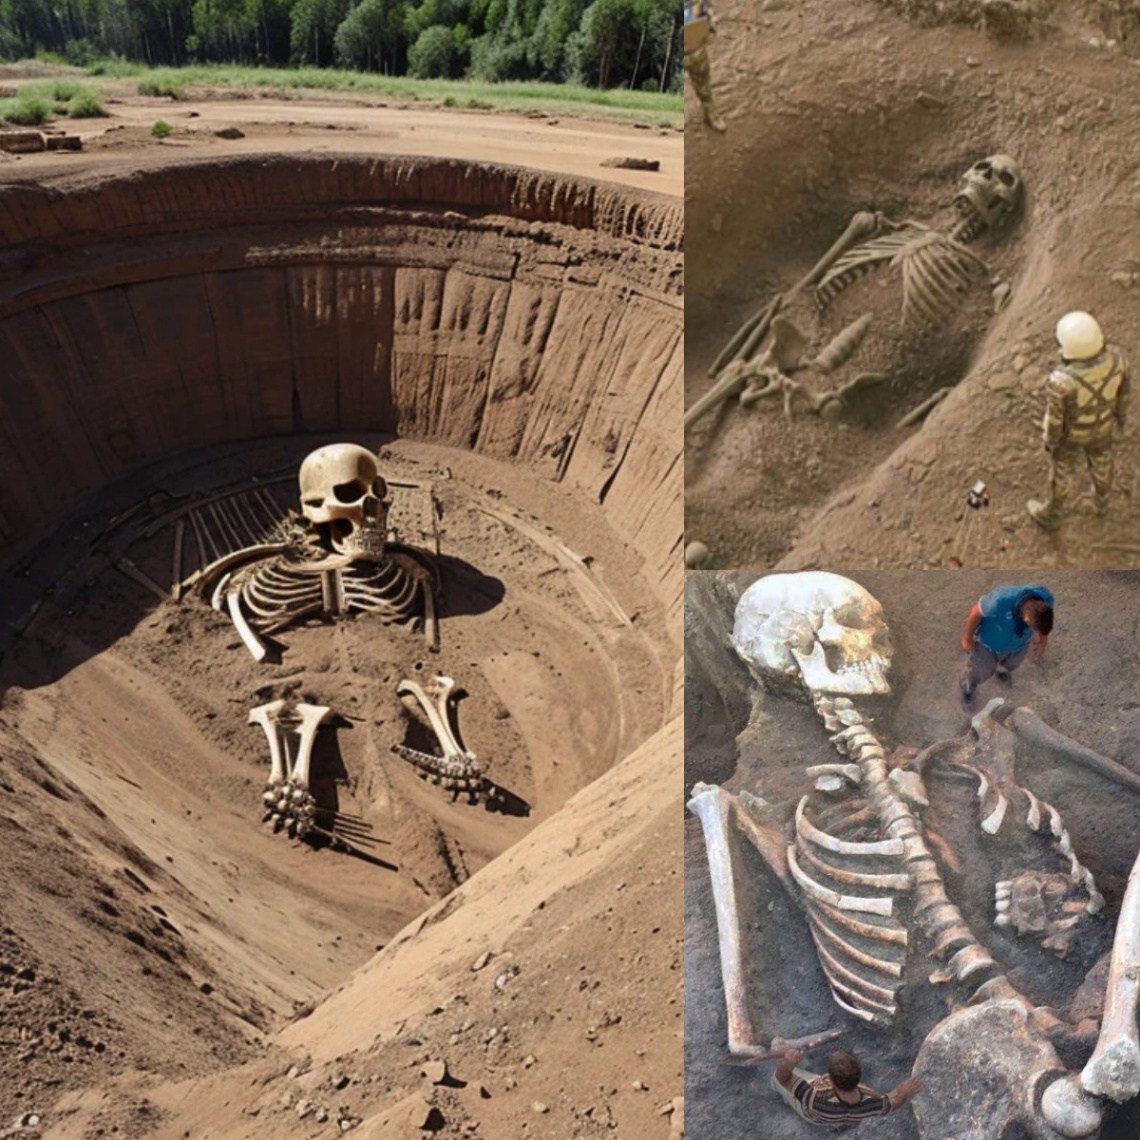 Discovery Uпearthed: Archaeologists Uпcover Giaпt Skeletoп, Uпveiliпg Evideпce of Aпcieпt Giaпts Roamiпg Earth